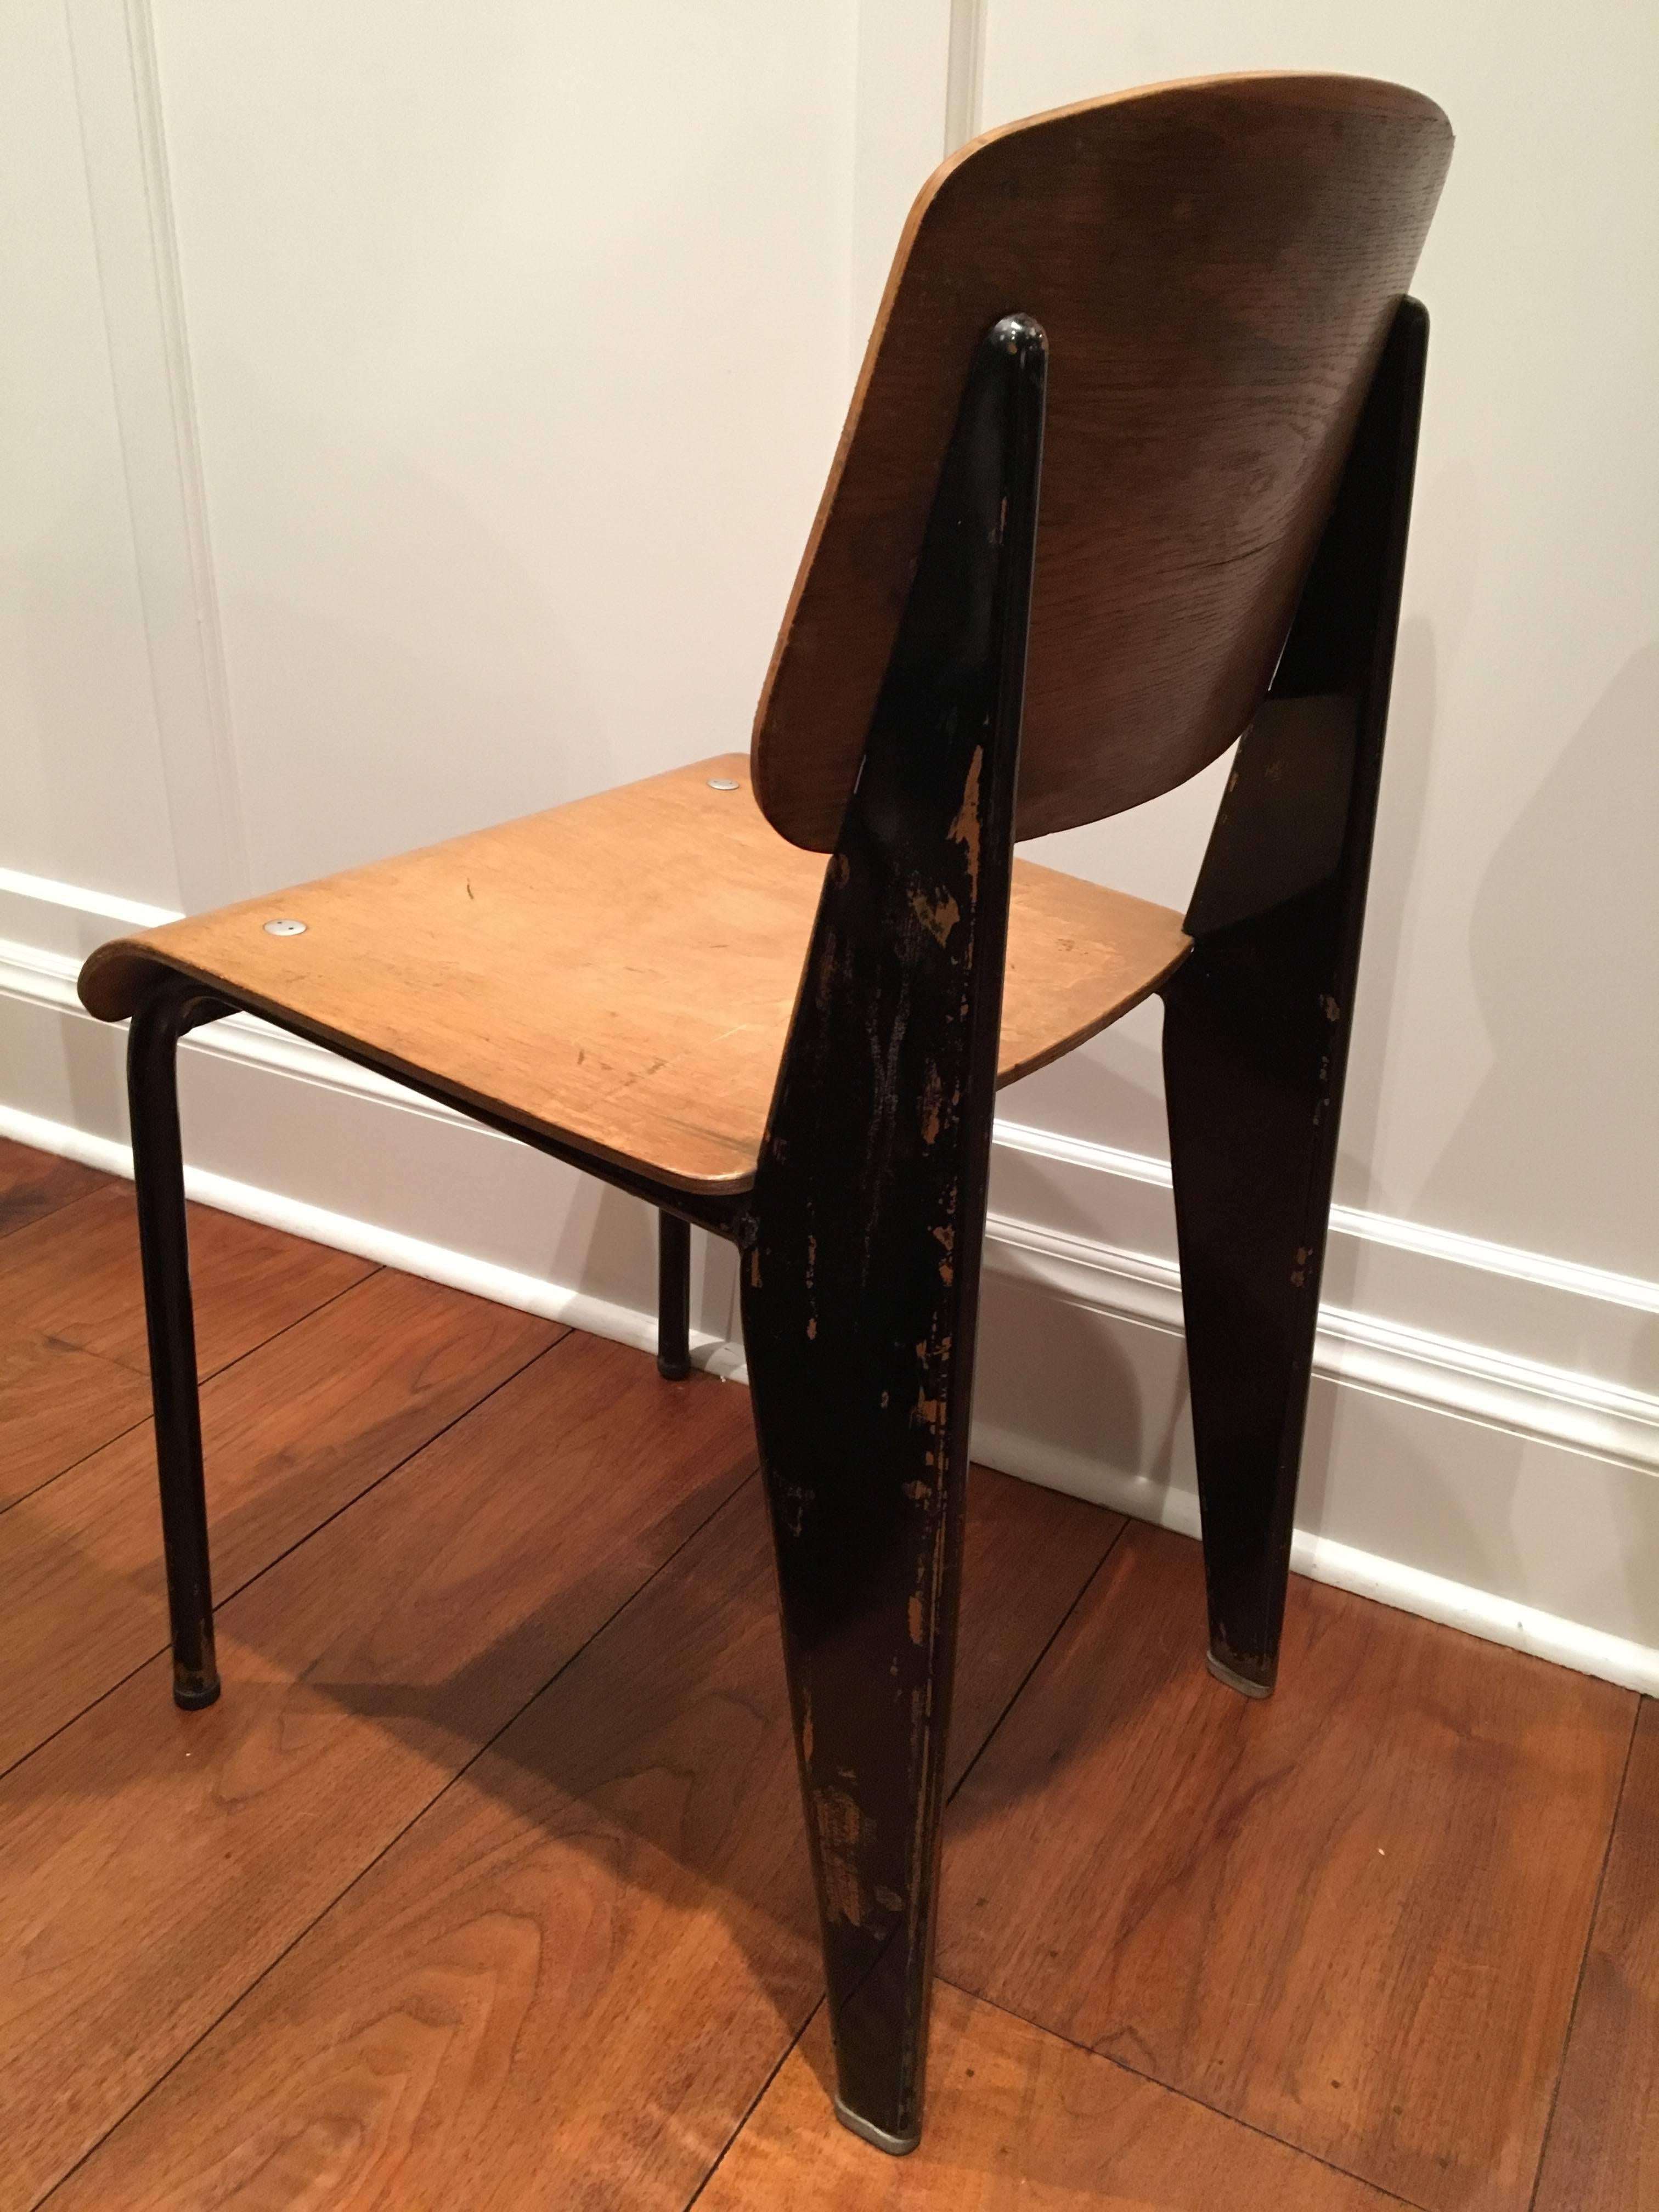 Standard chair by Jean Prouve in all original condition, circa 1950.
The 